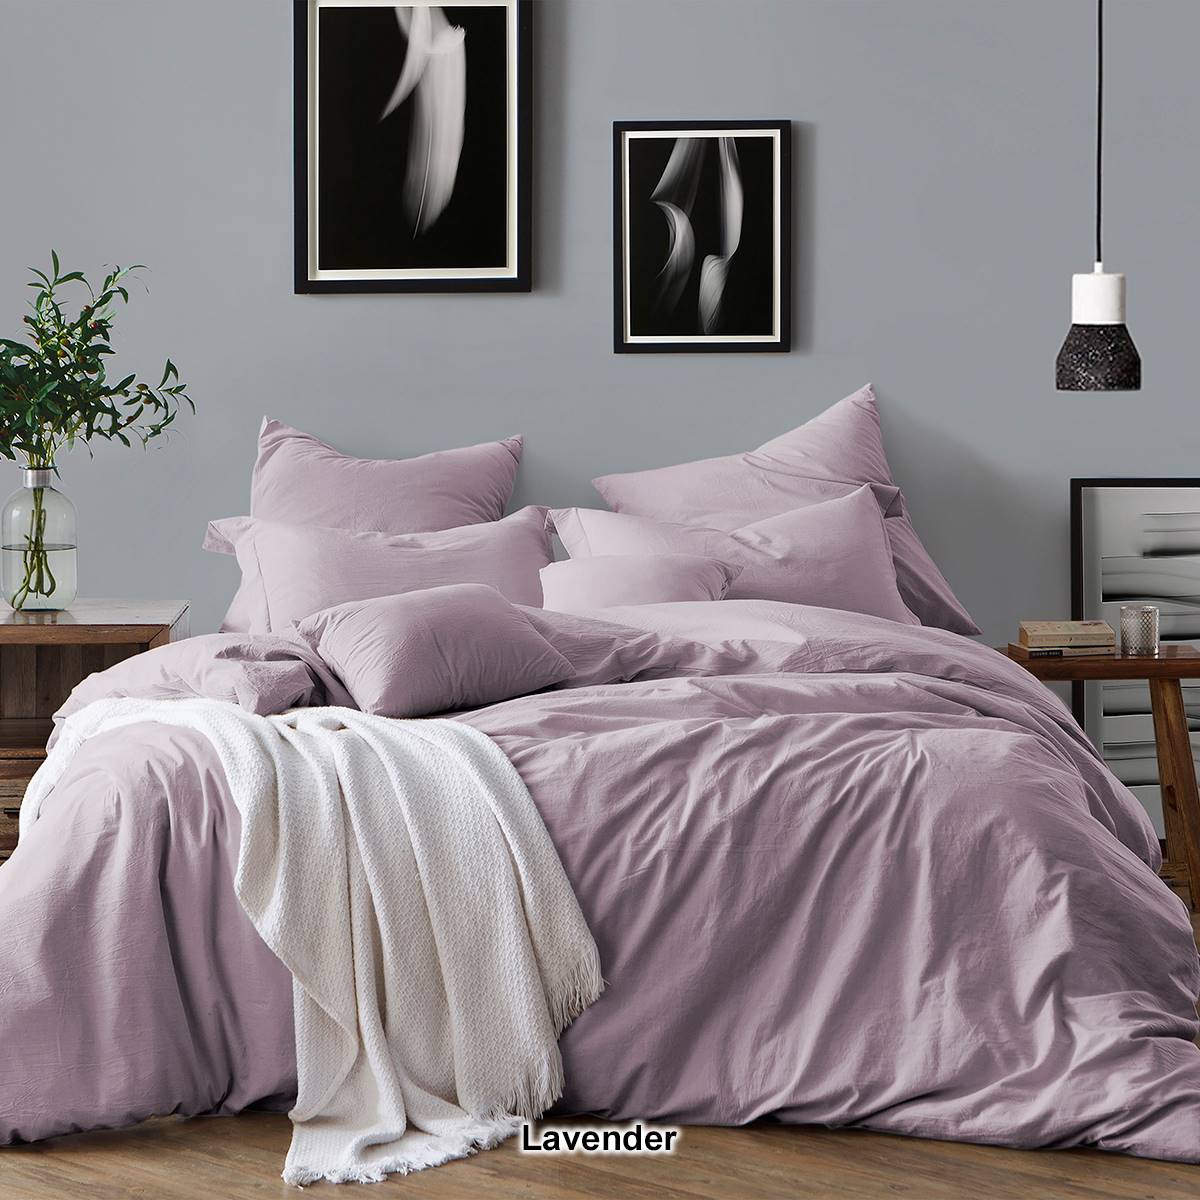 Cathay(R) Swift Home(R) Chambray Duvet Cover Set